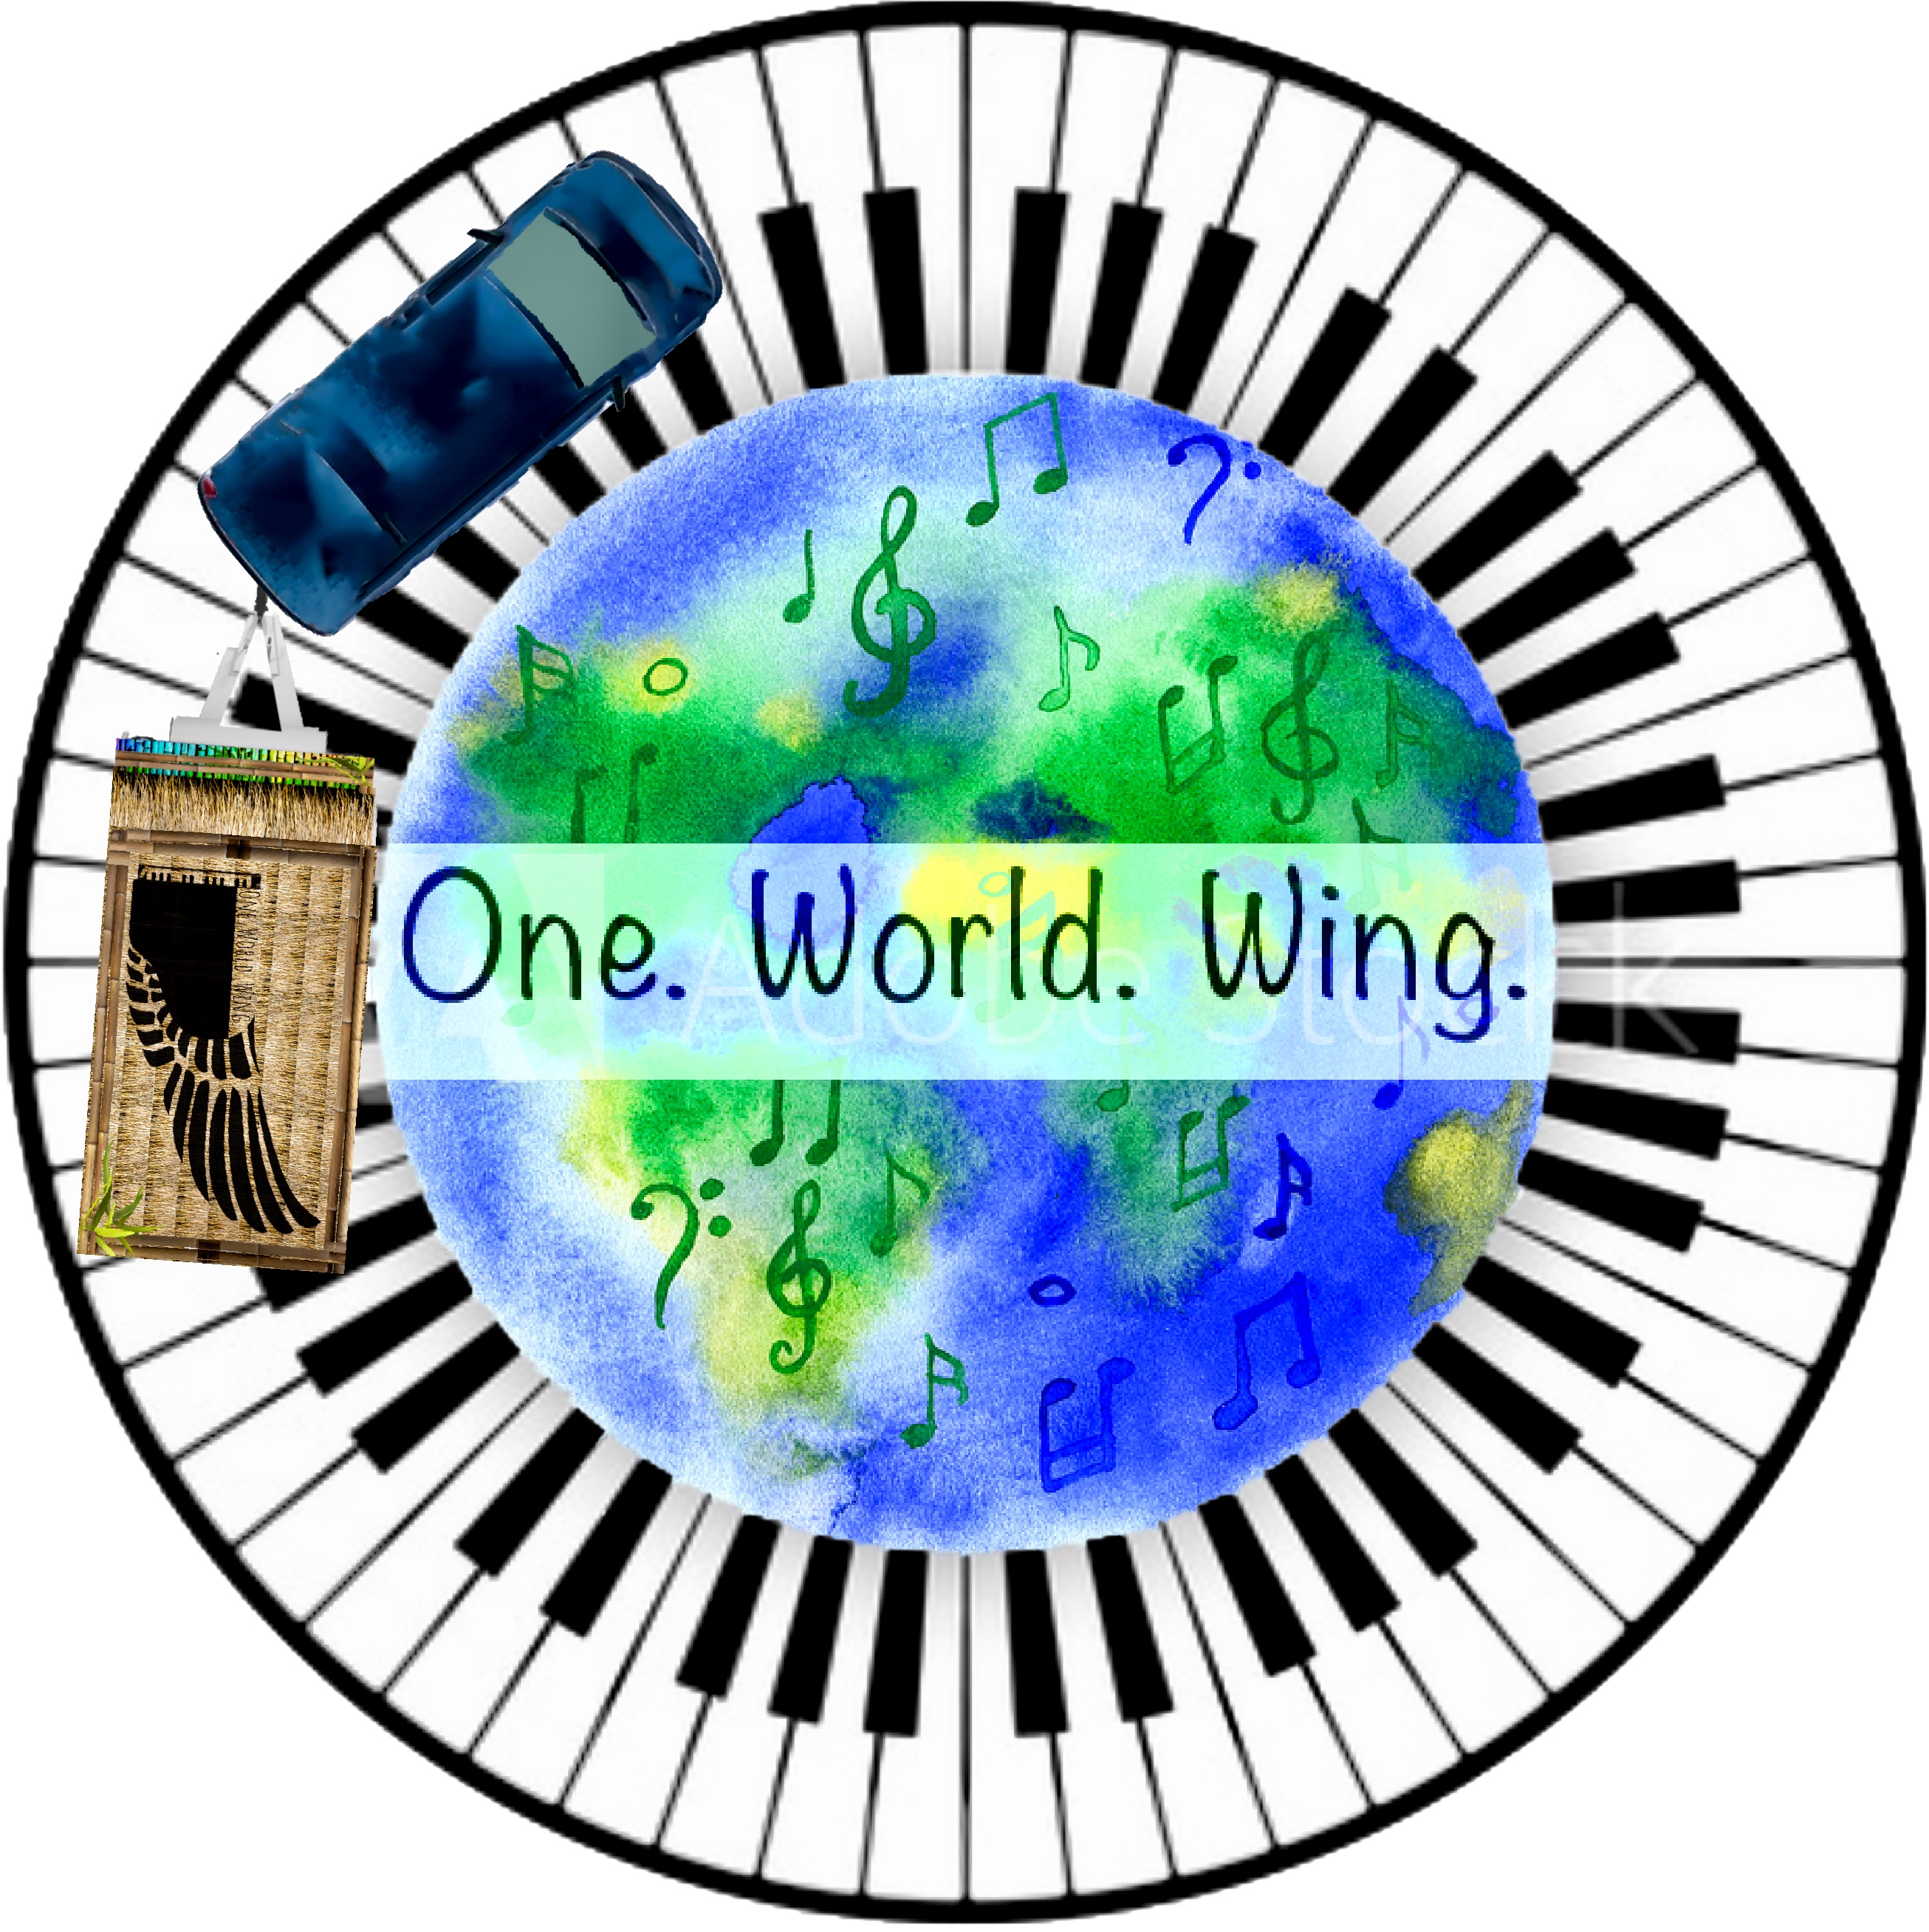 One. World. Wing.